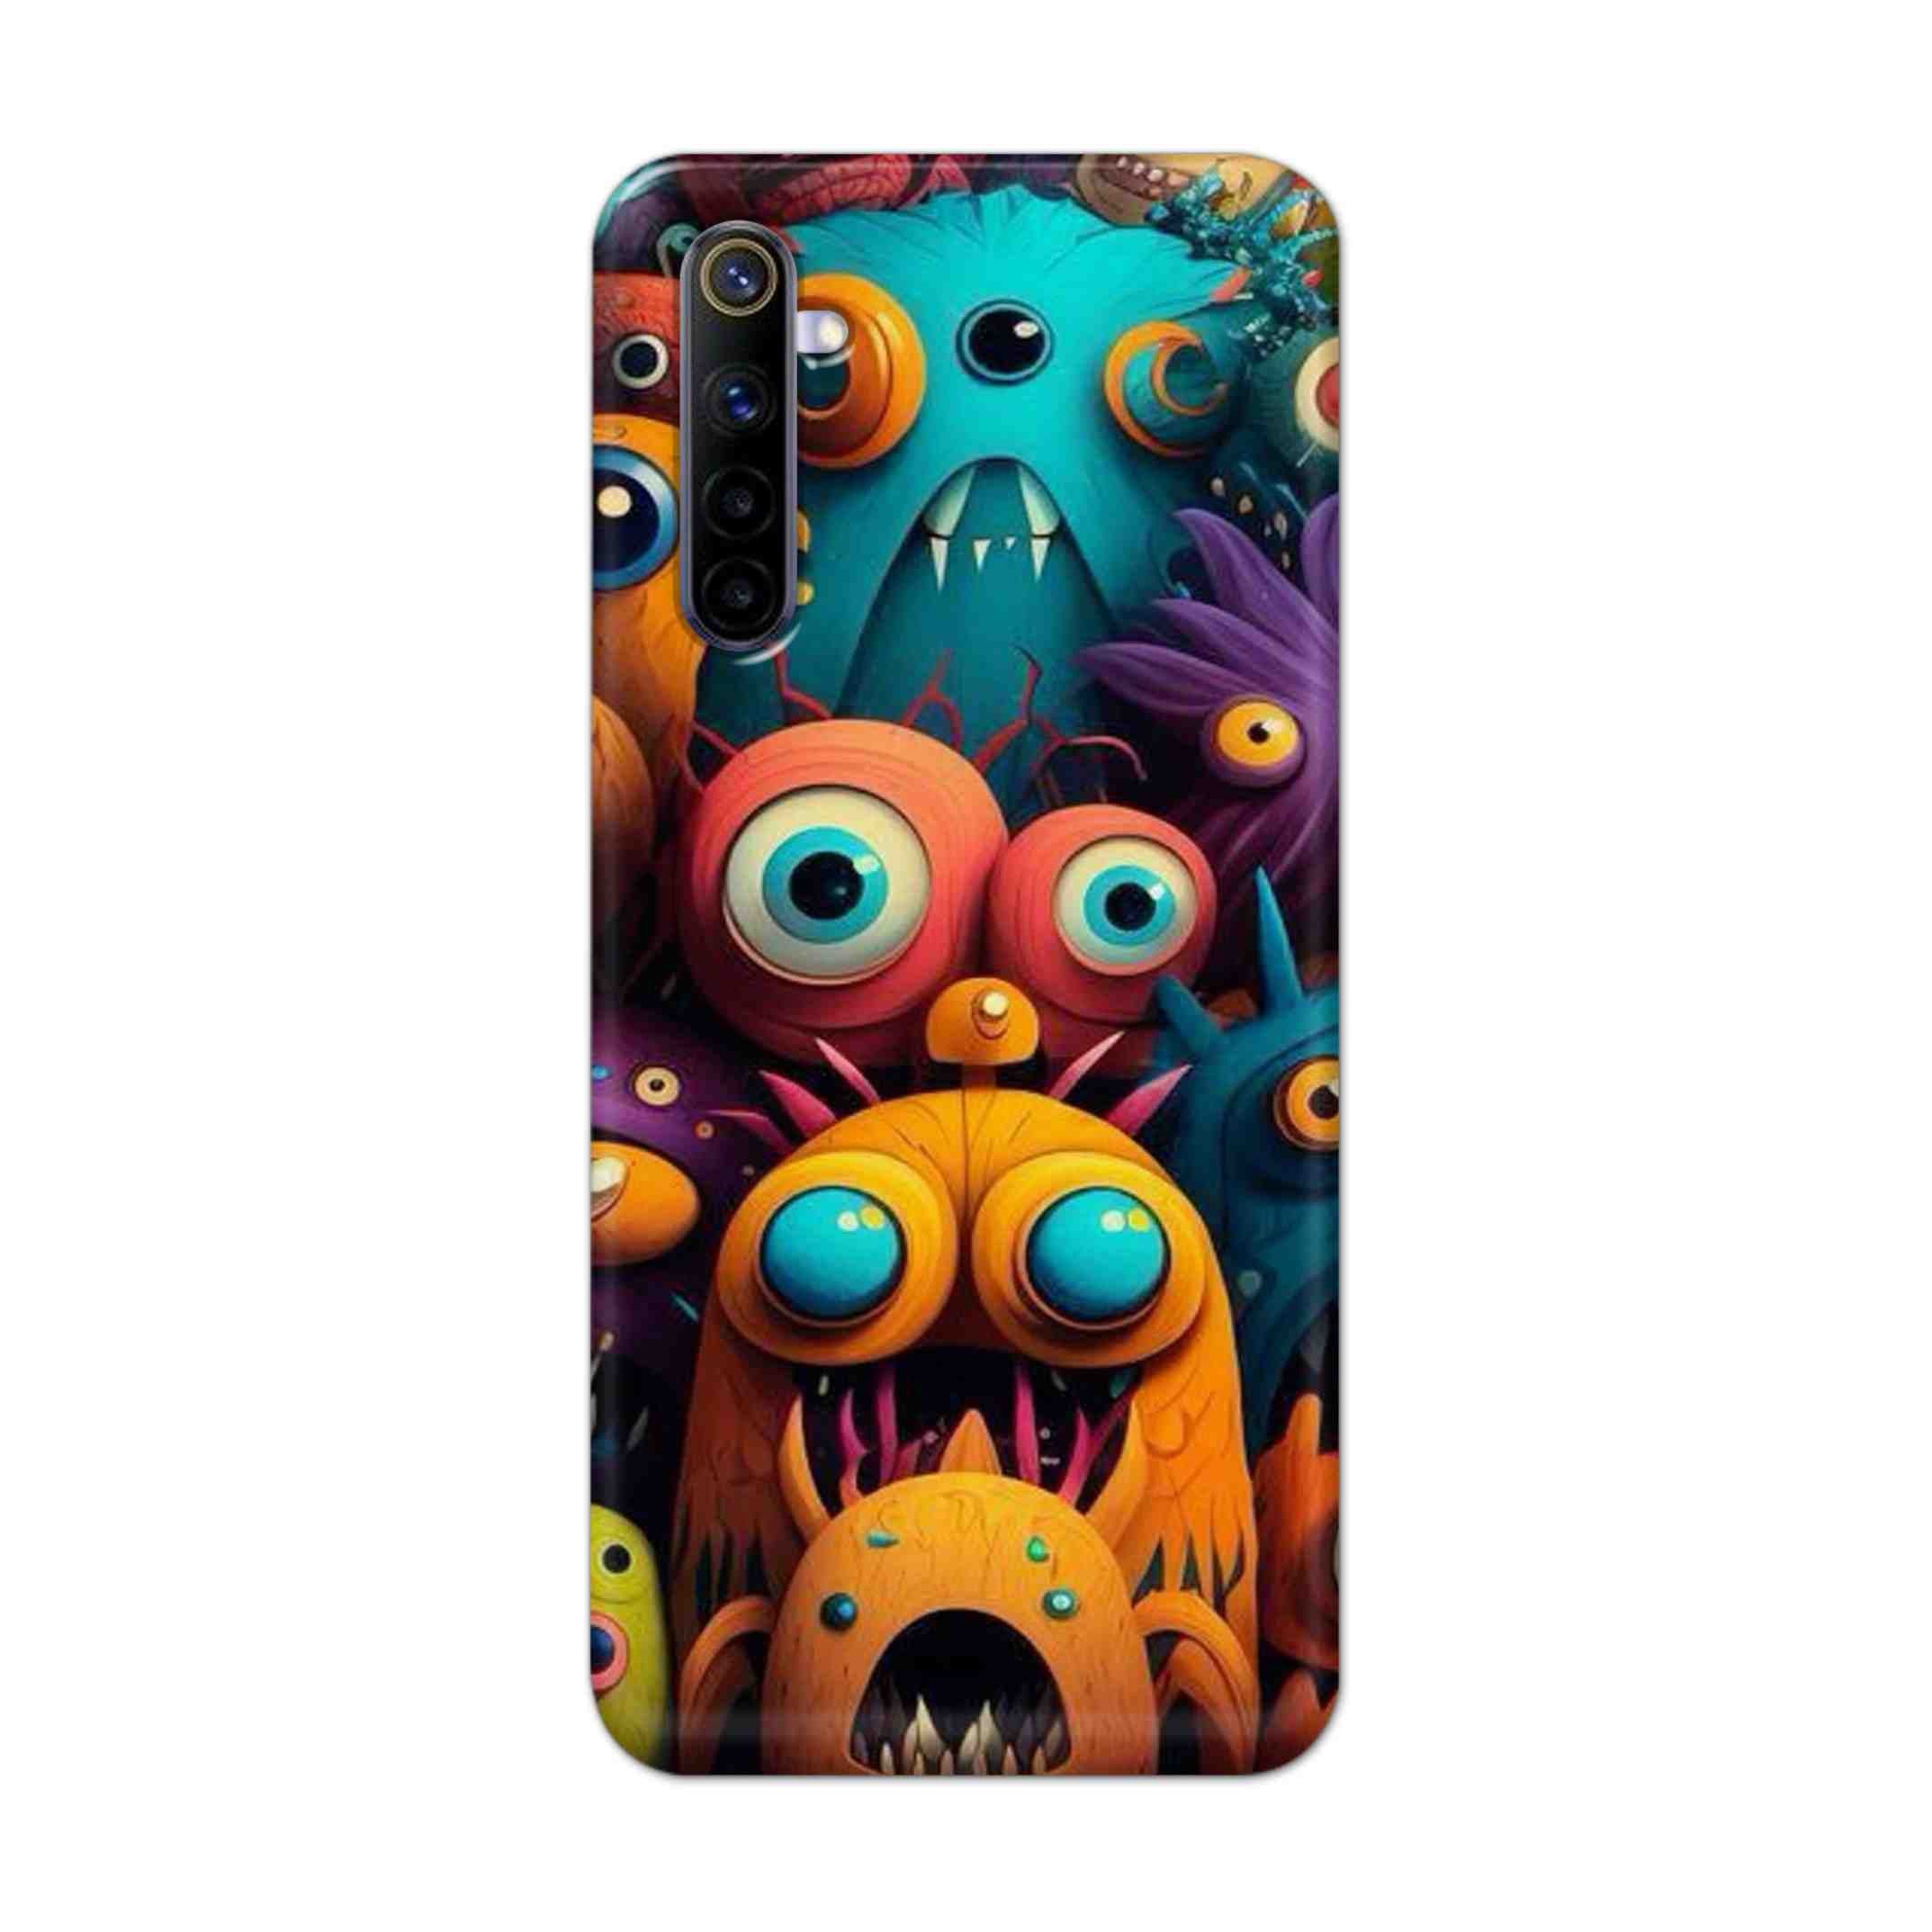 Buy Zombie Hard Back Mobile Phone Case Cover For REALME 6 PRO Online